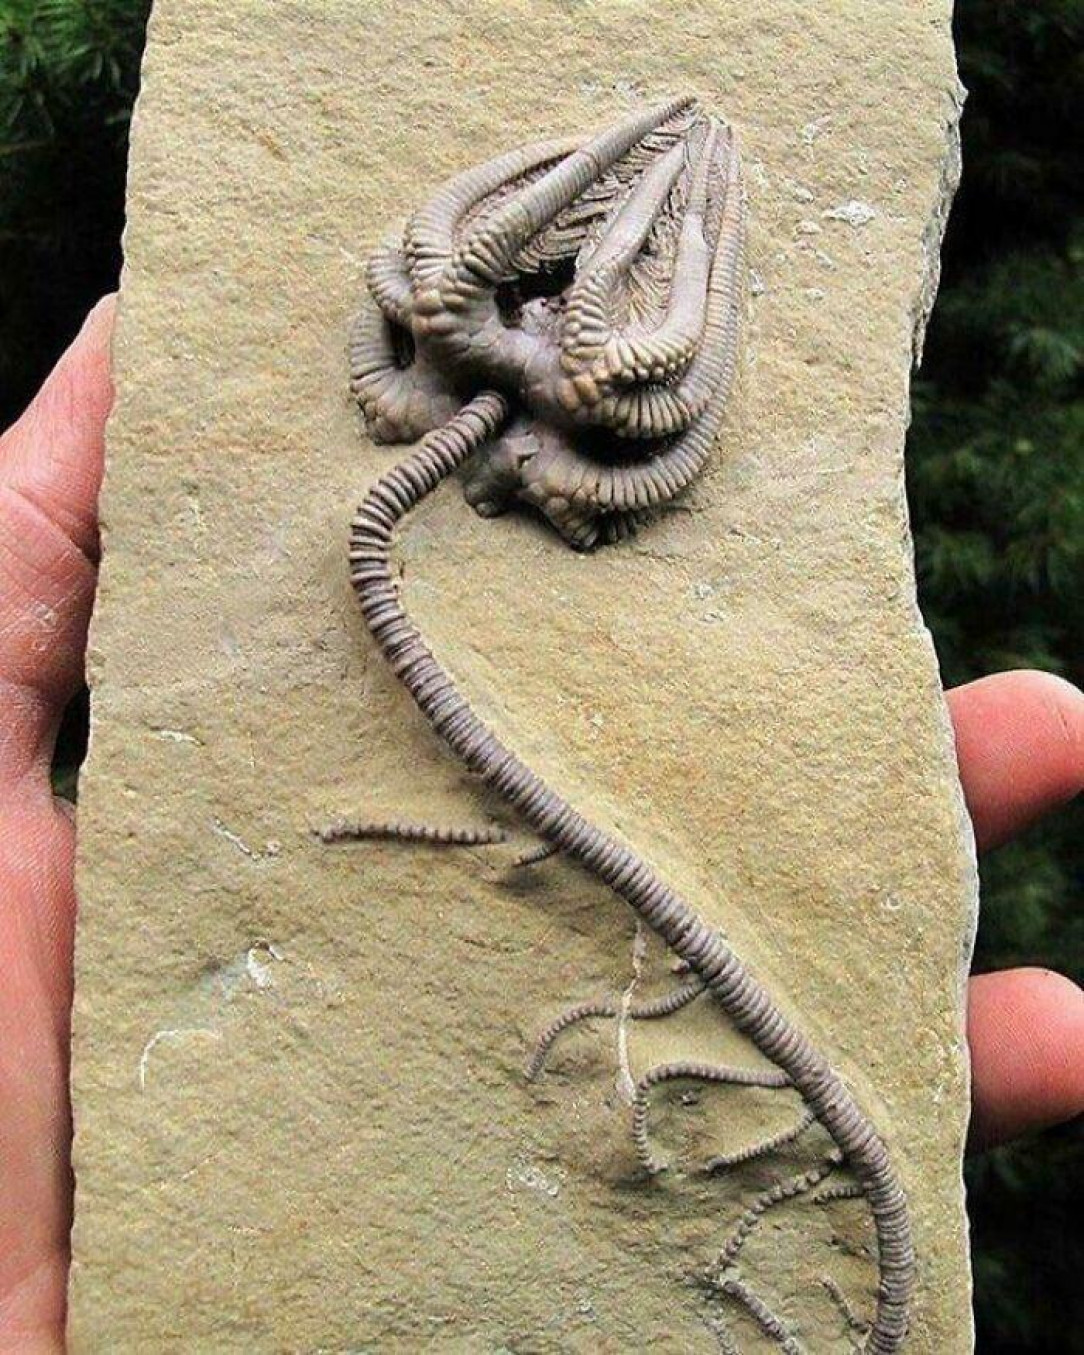 A superbly preserved sea lily fossil, approximately 345 million years old